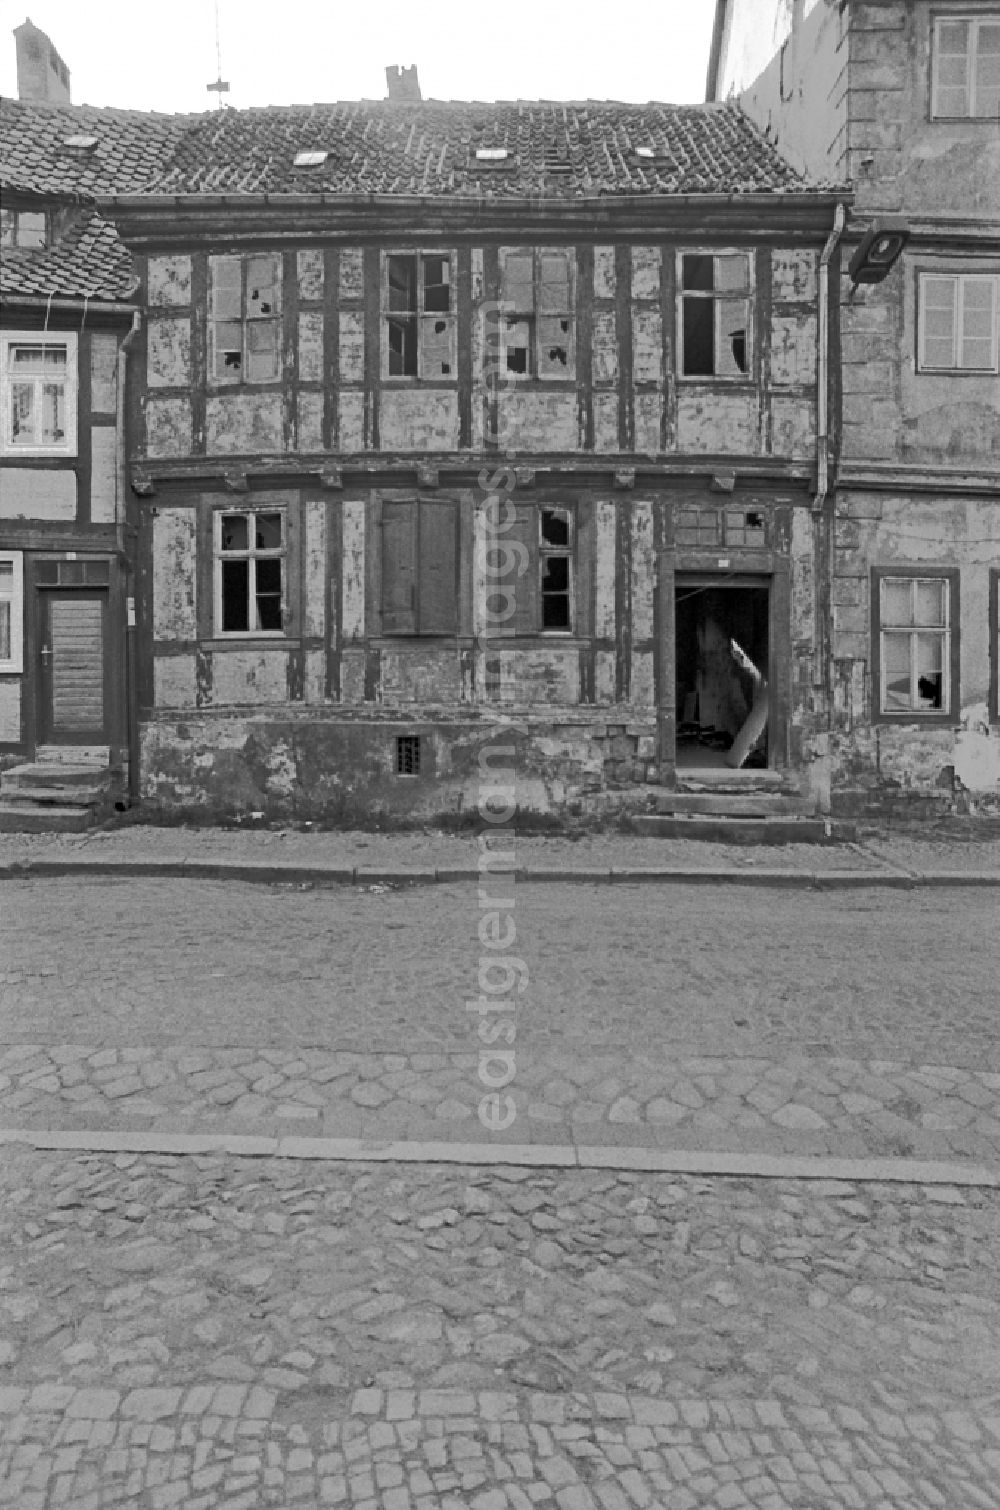 Quedlinburg: Rubble and ruins Rest of the facade and roof structure of the half-timbered house in Quedlinburg, Saxony-Anhalt on the territory of the former GDR, German Democratic Republic